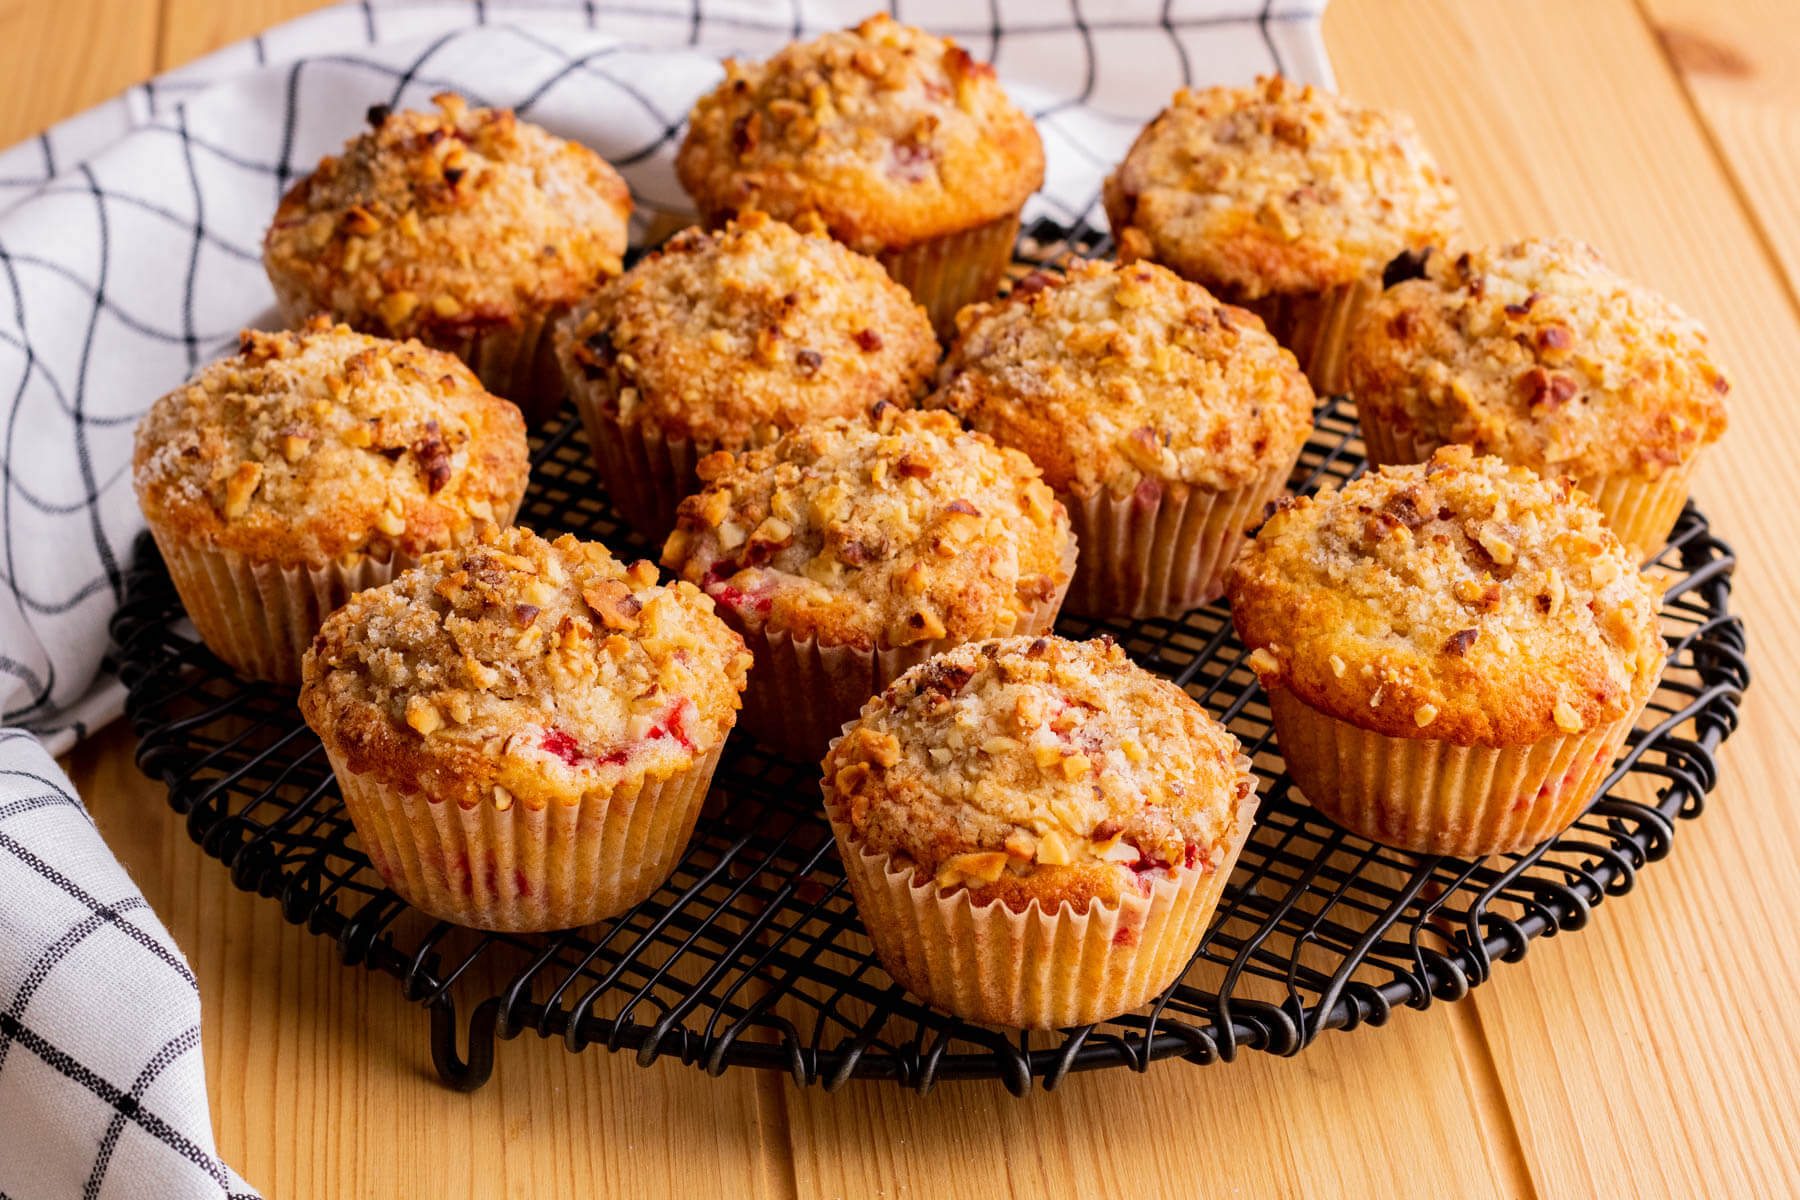 Strawberry Rhubarb Muffins with Streusel